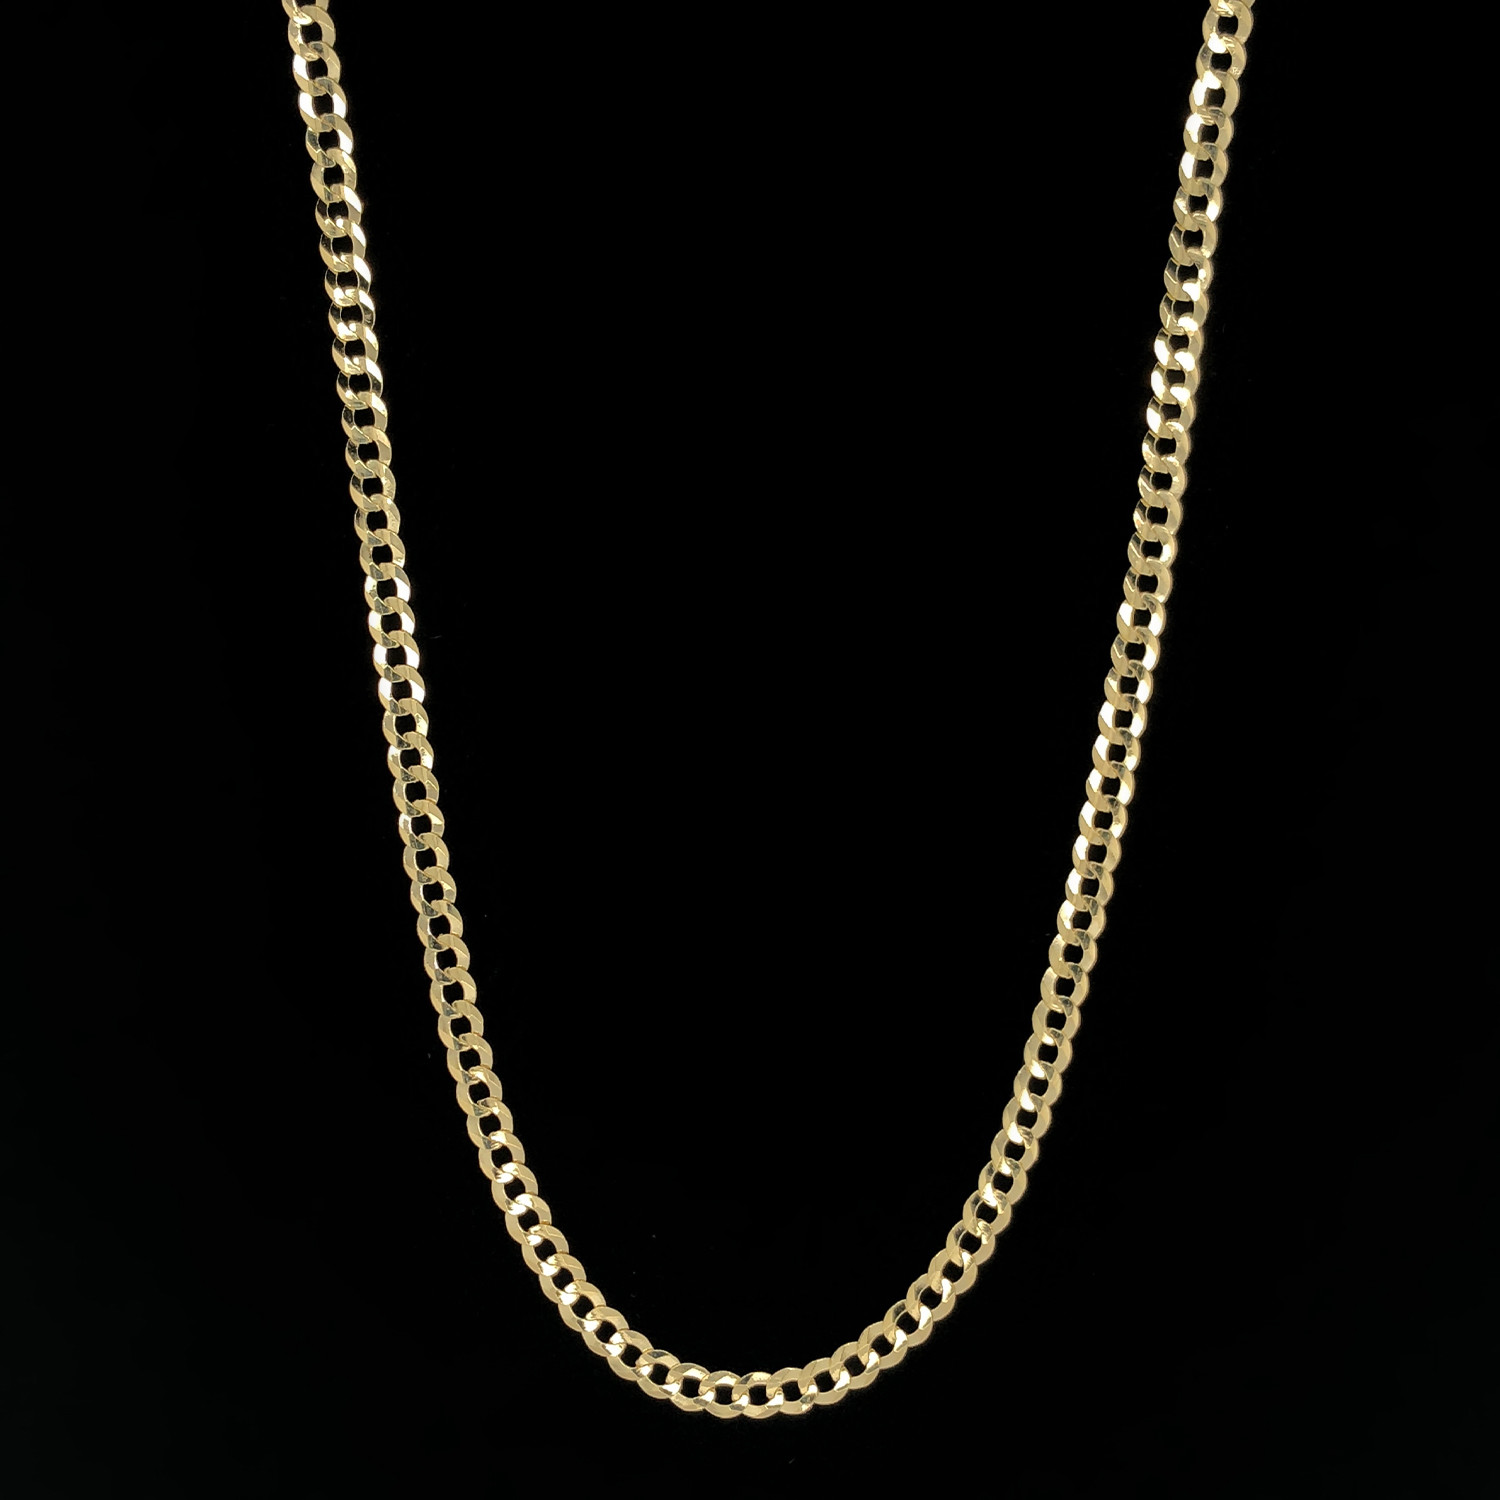 Solid 14K Gold 3.8MM Thick Cuban Link Chain Necklace (22